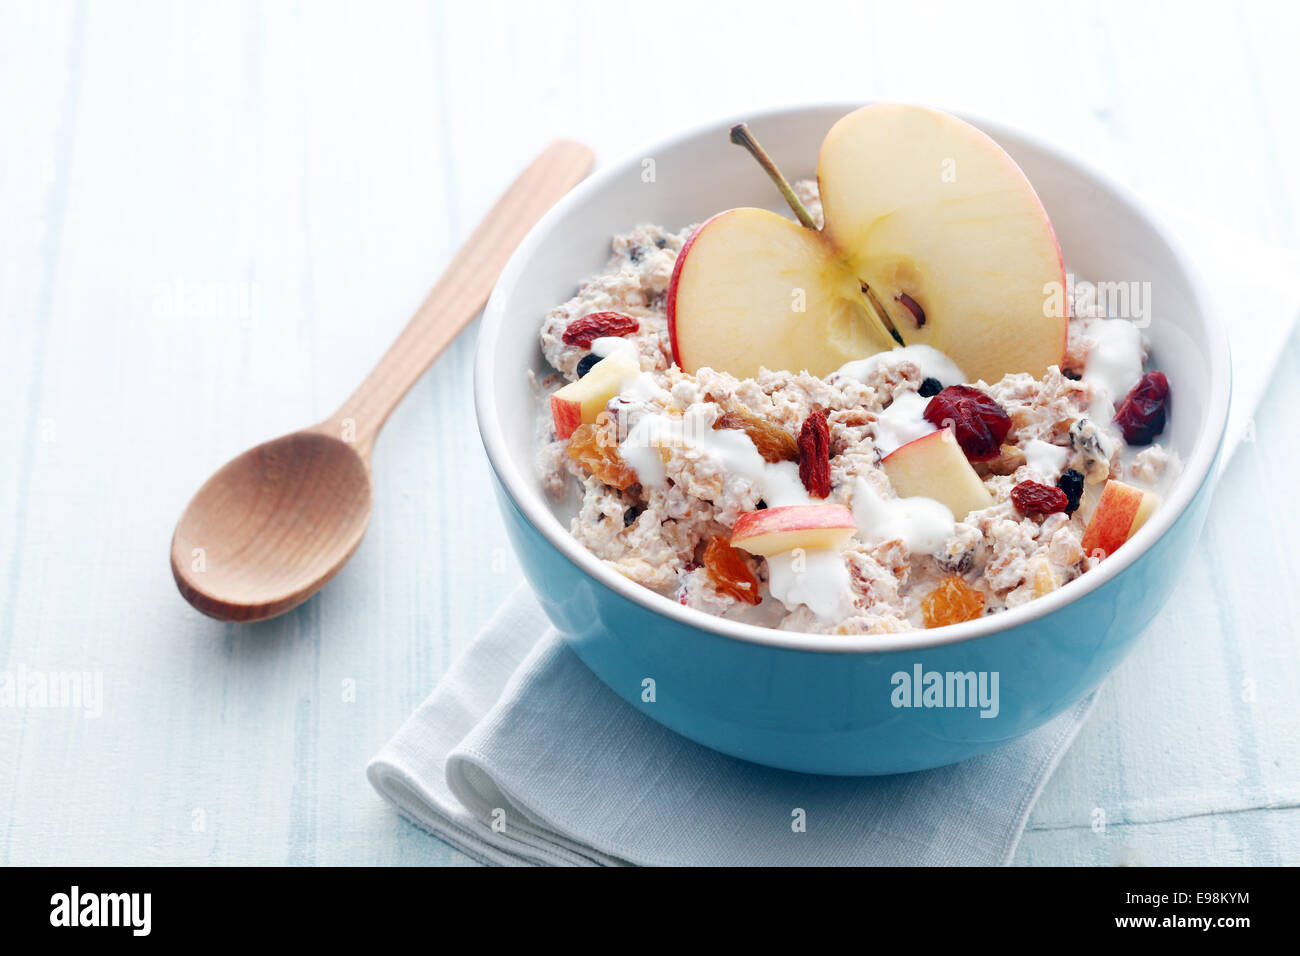 Healthy bowl of muesli, apple, fruit, nuts and milk for a nutritious breakfast with a low glycemic index ensuring plenty of energy for the day Stock Photo